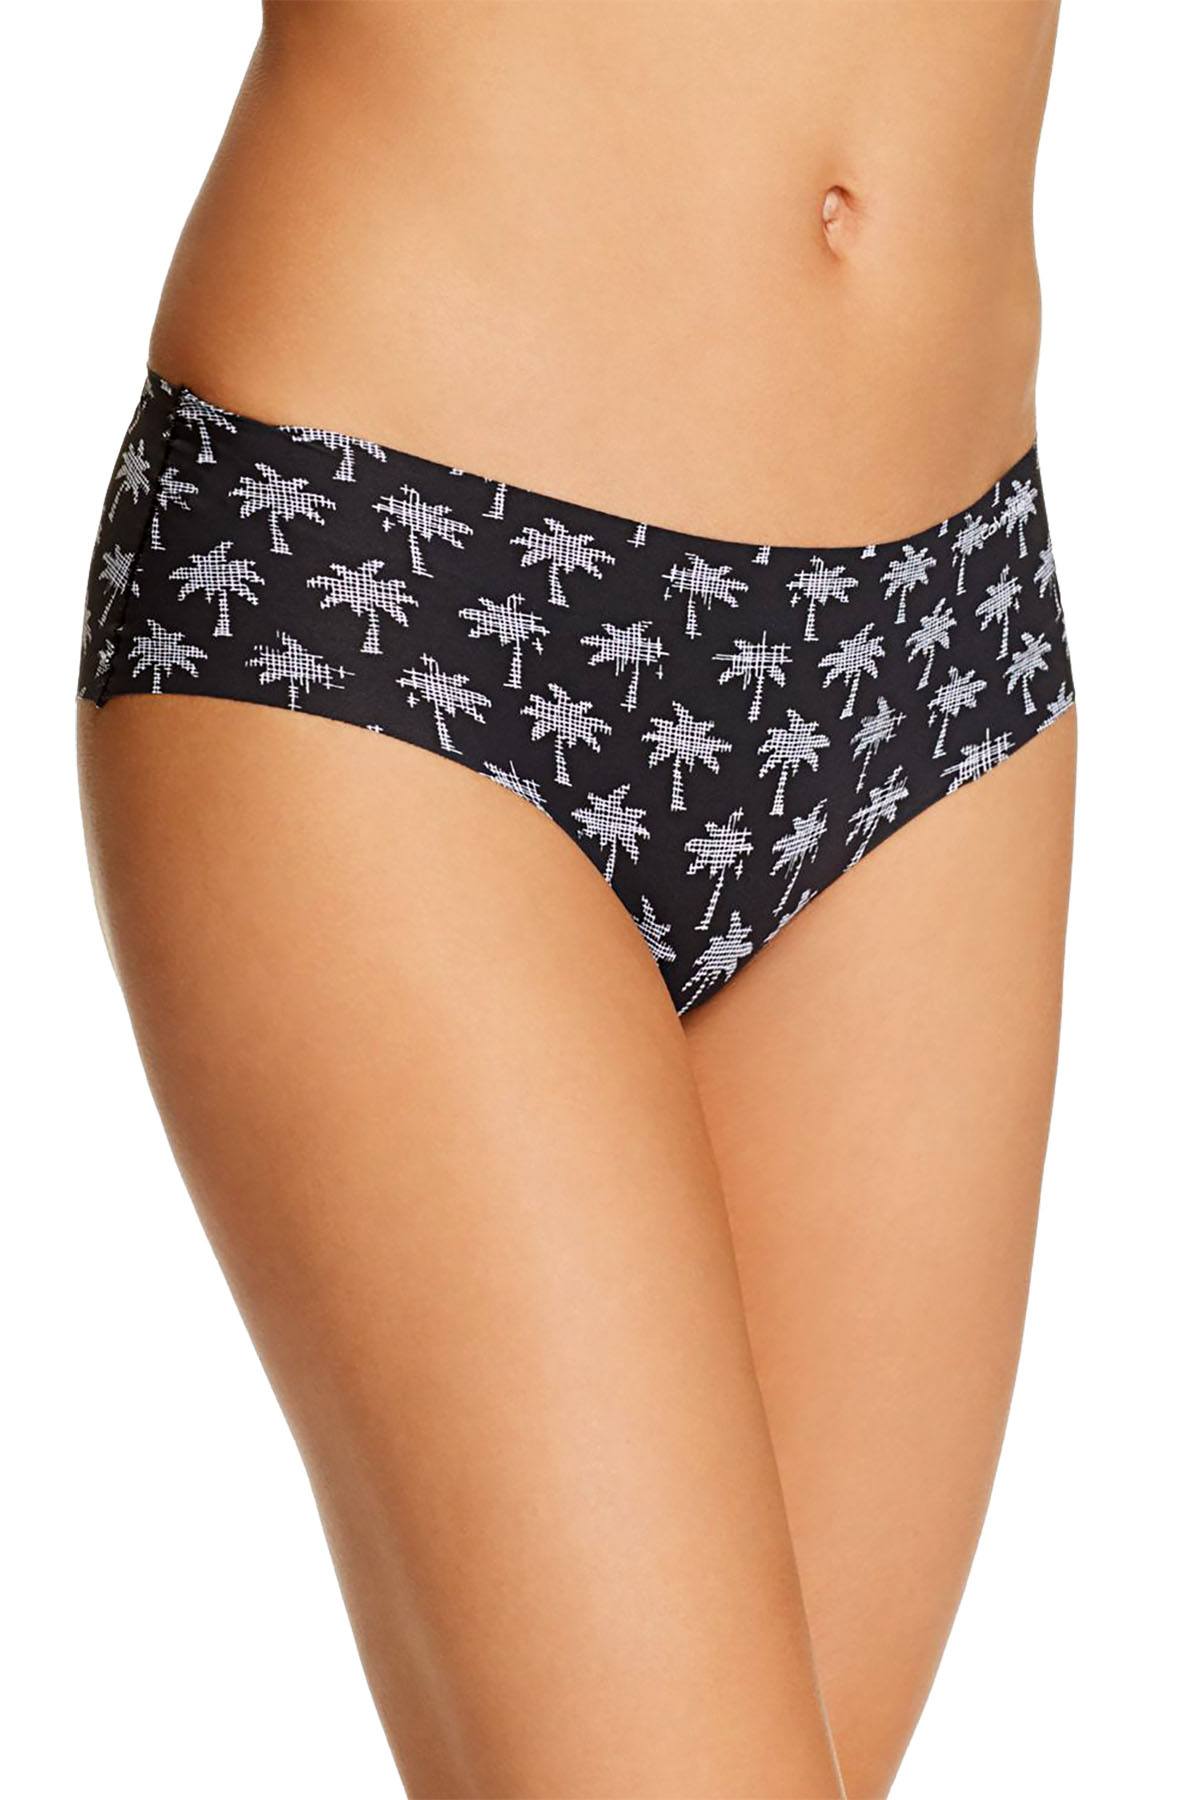 Calvin Klein Black Fools-Paradise Printed Invisibles Hipster